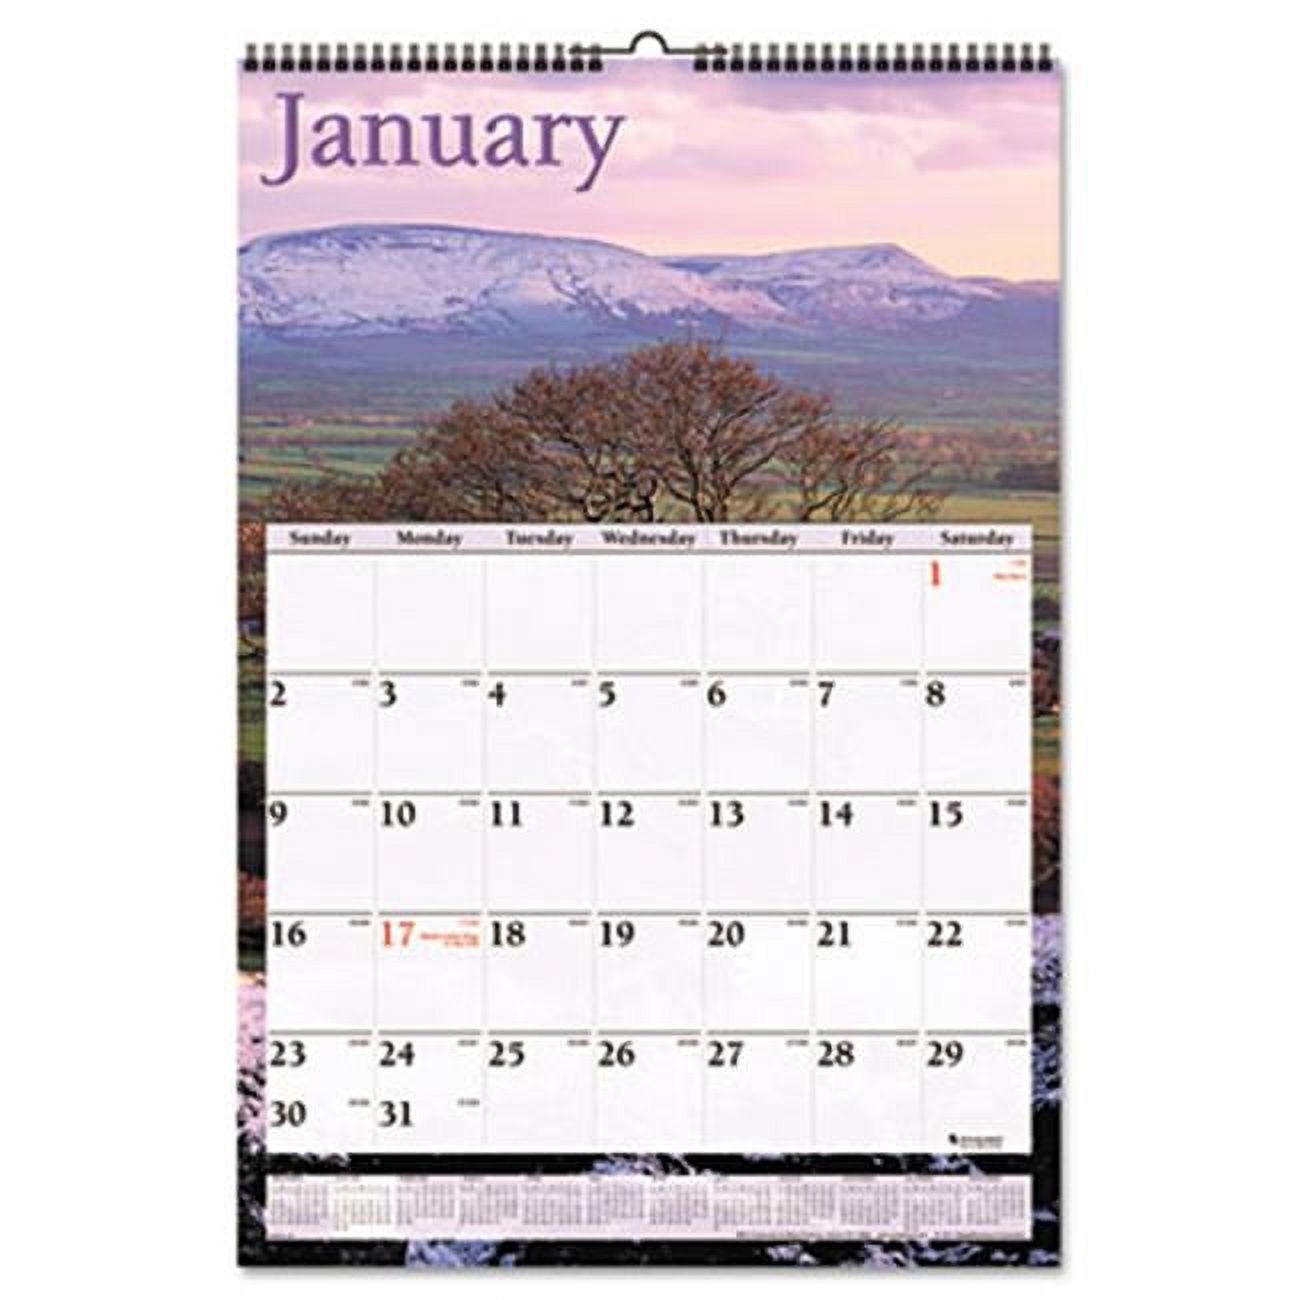 At-A-Glance DMW20028 Full-Color Scenic Photographic Monthly Wall Calendar  12 x 17 - image 1 of 1